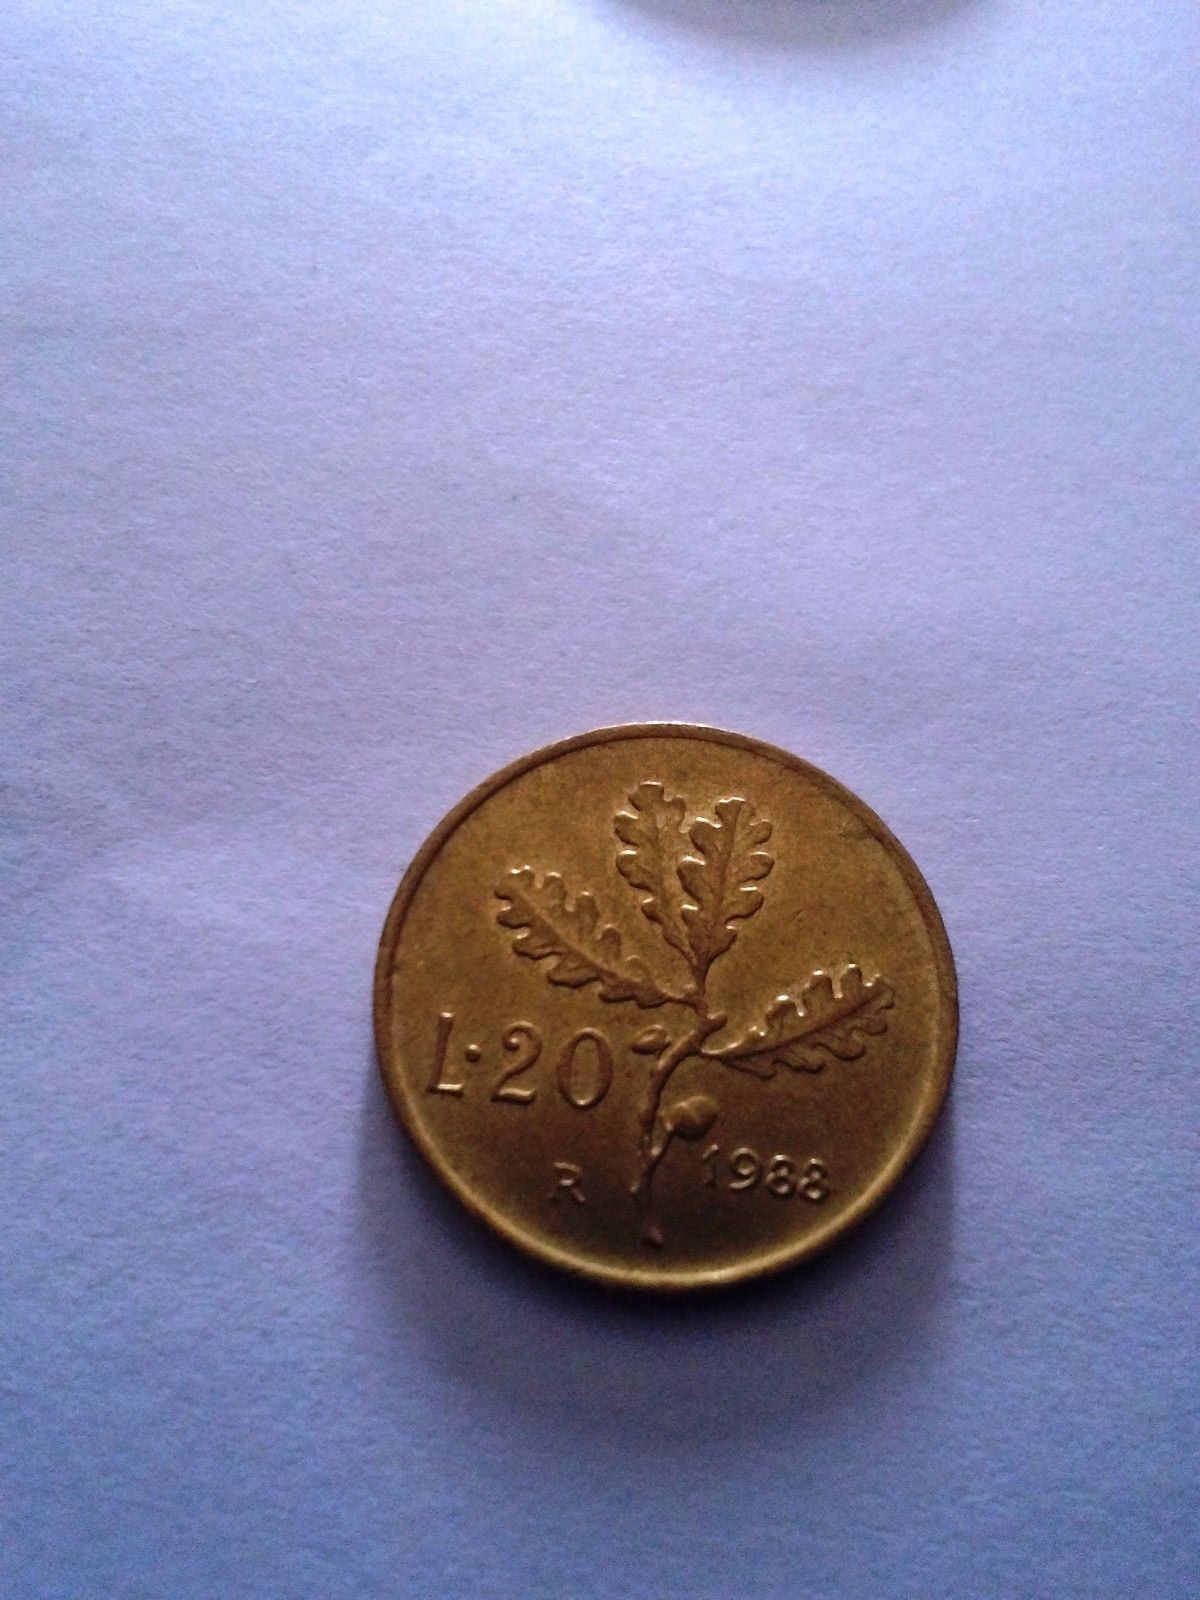 Primary image for Italy 20 Lire Coin 1988